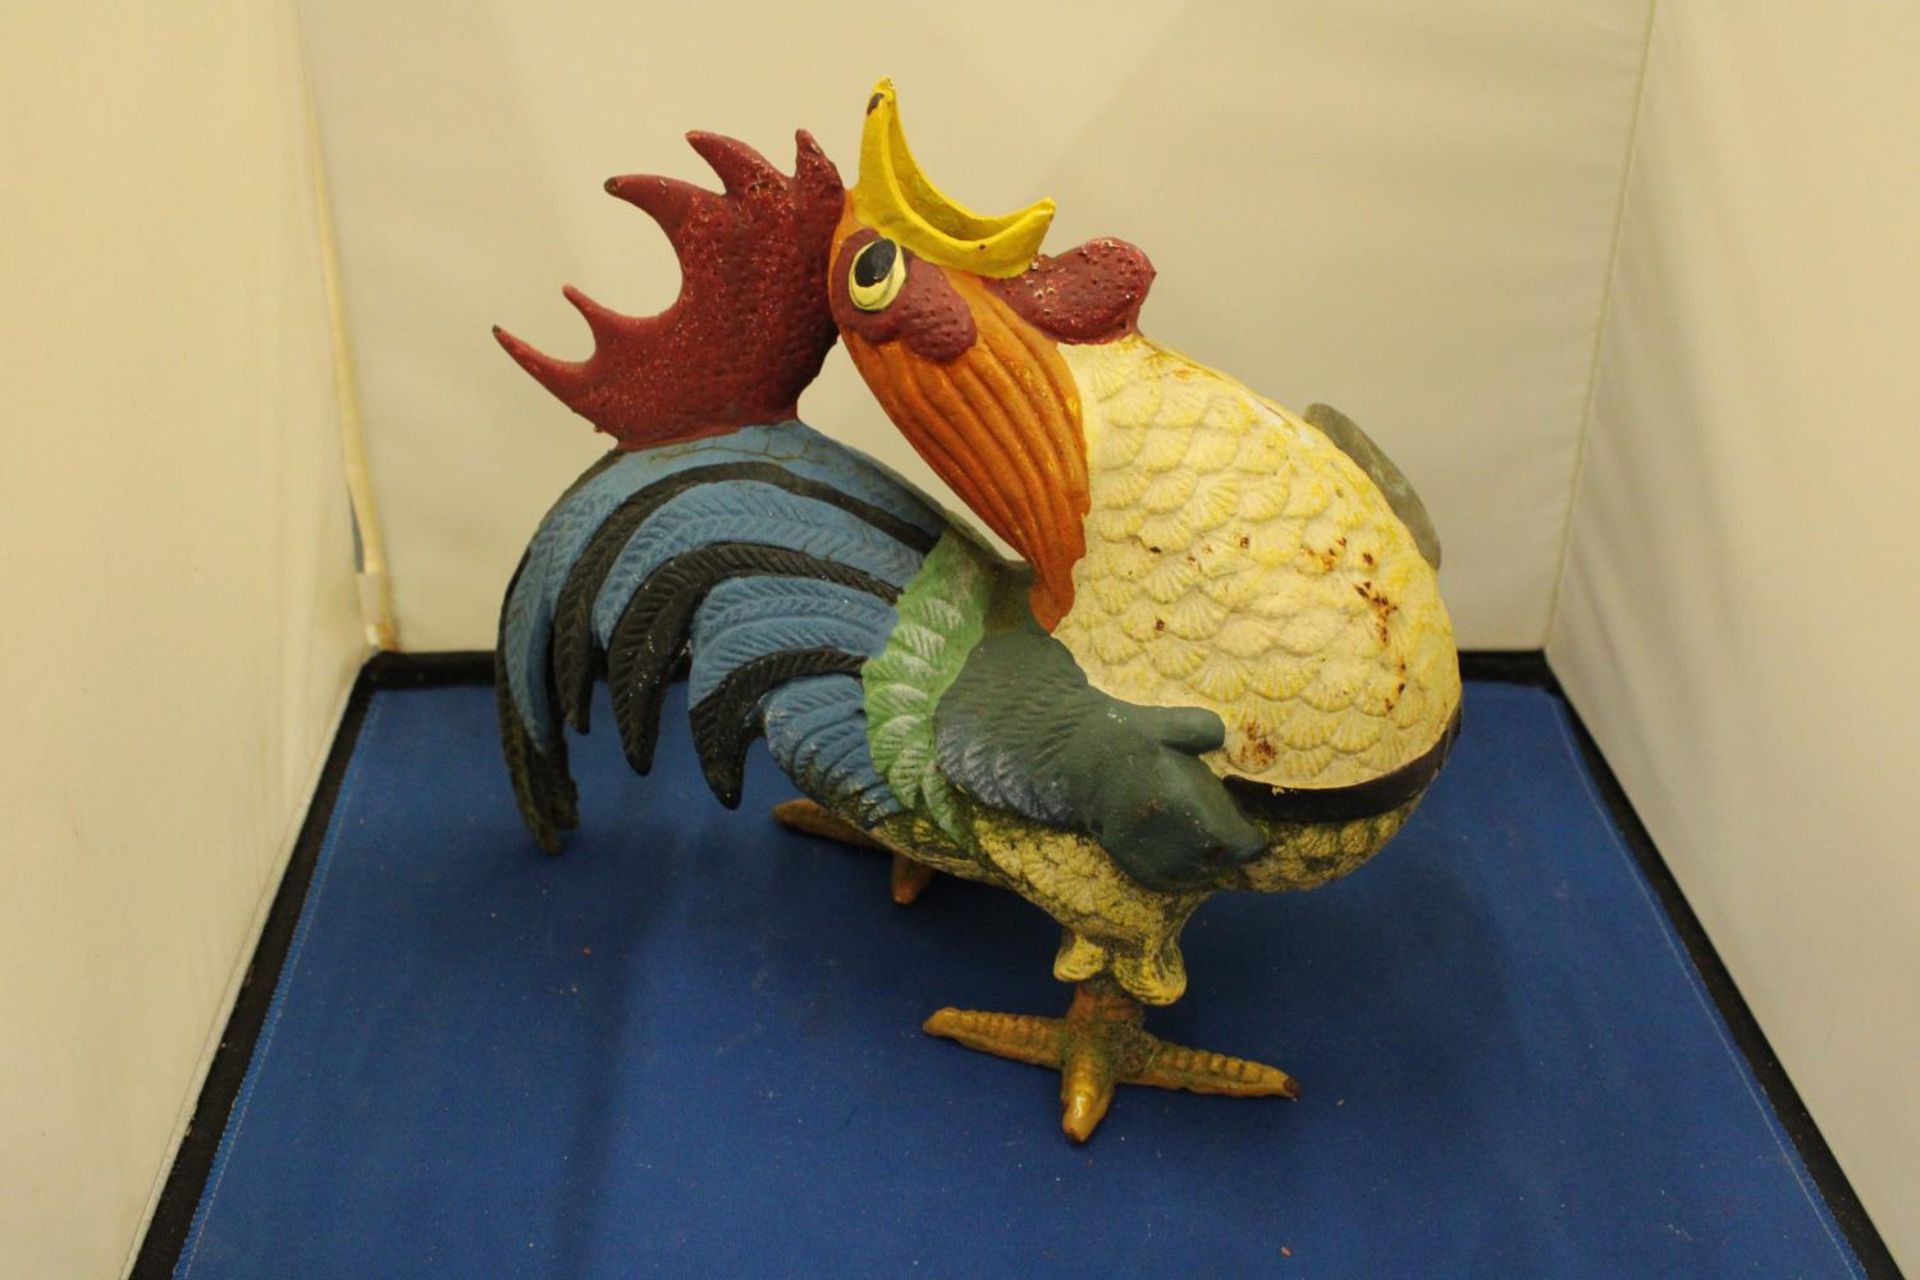 A HEAVY HAND PAINTED FRENCH COCKEREL